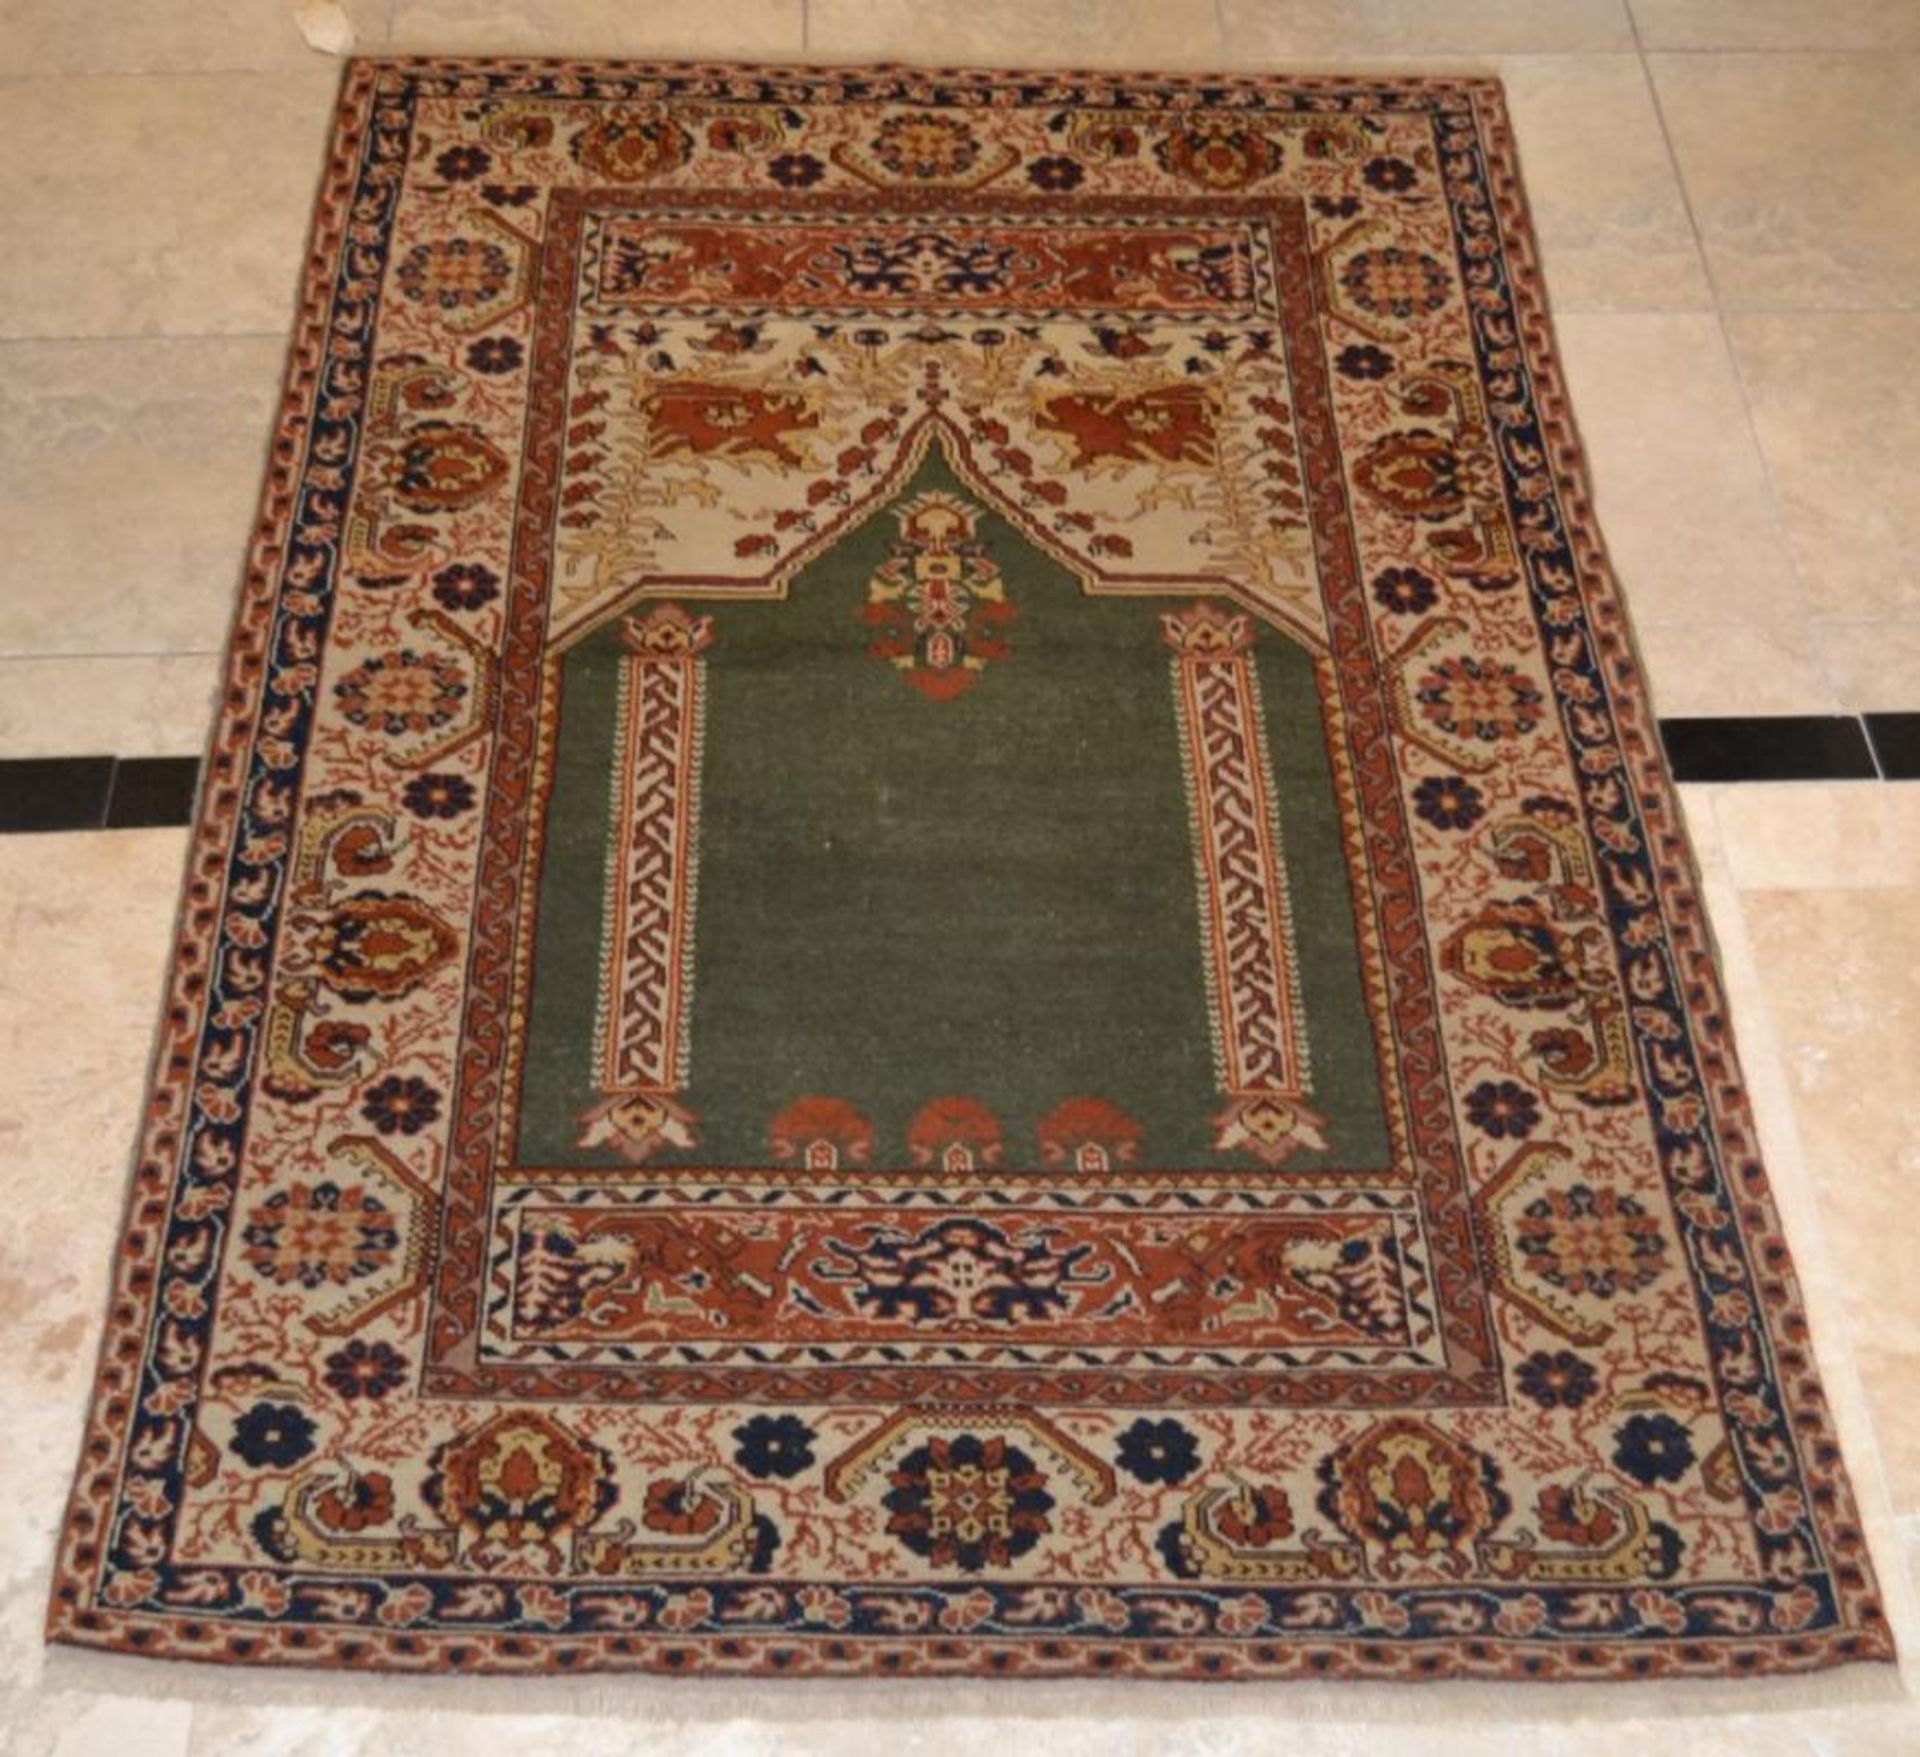 1 x 50 Year Old Turkish Prayer Rug - Vegetable Dyed Wool Foundation & Pile - Dimensions: 200x127cm - - Image 2 of 6